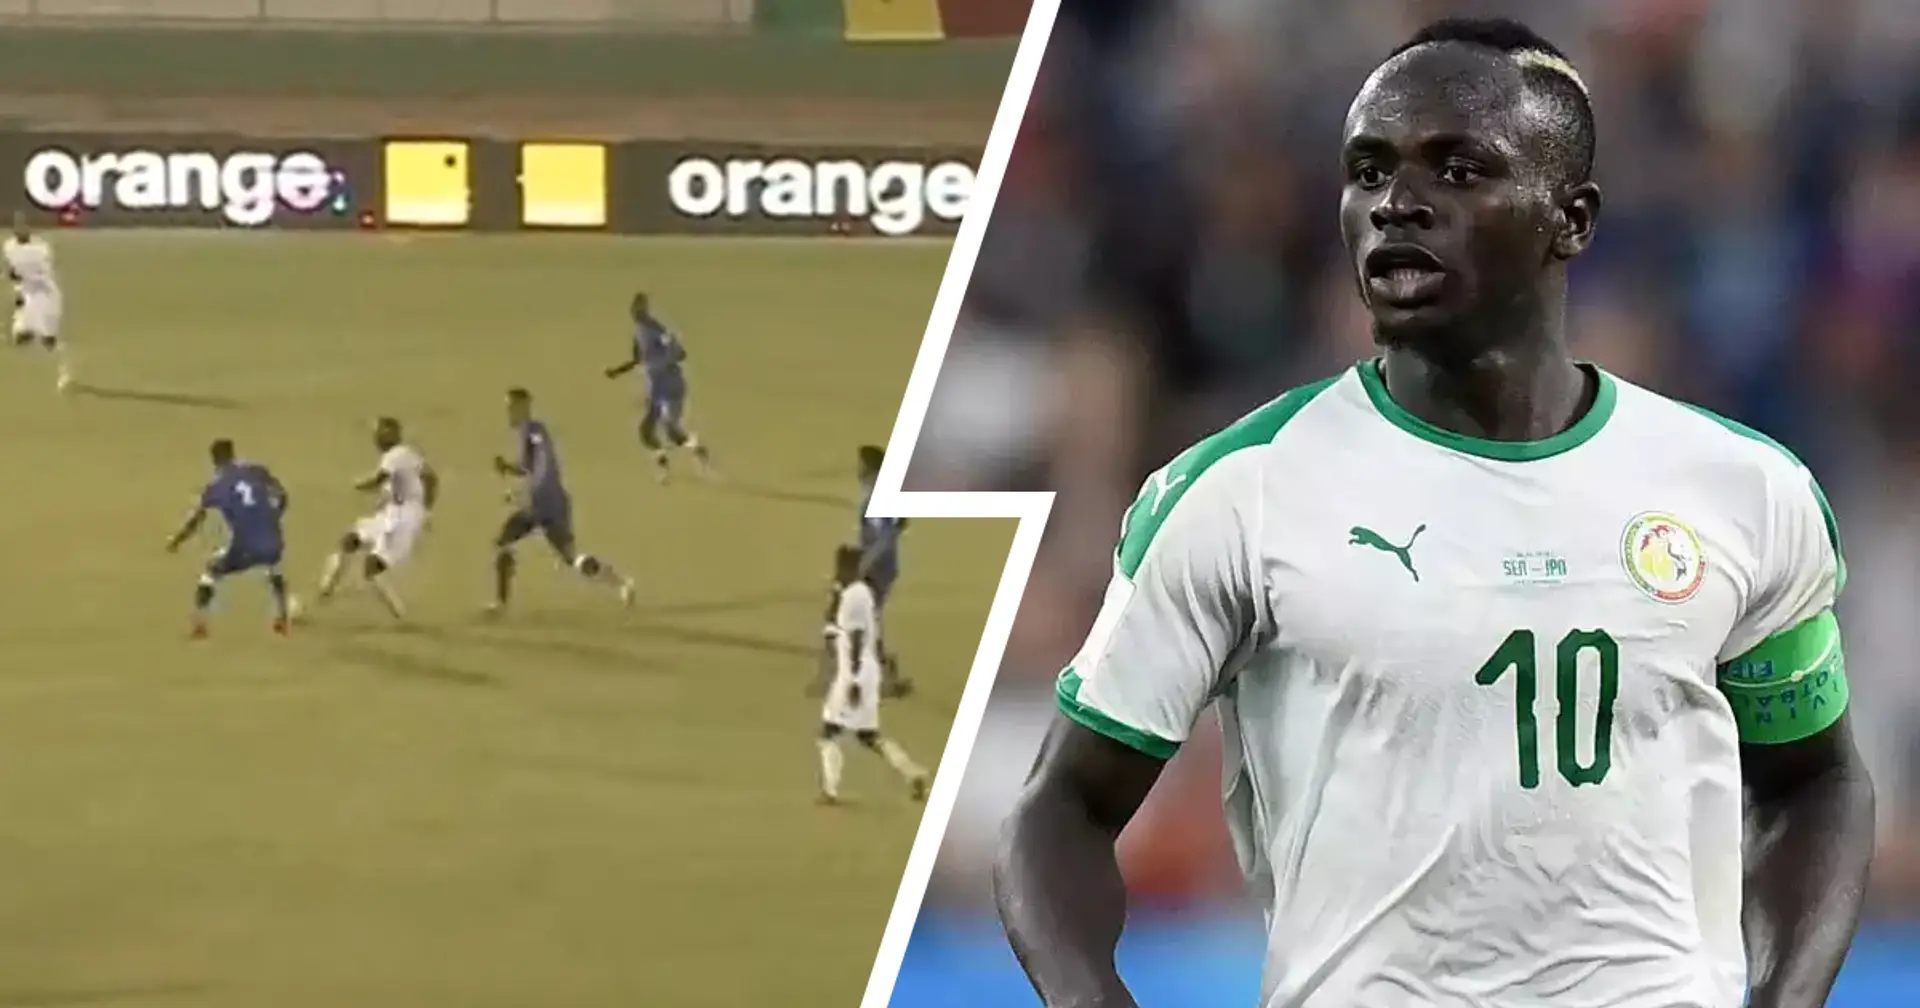 Caught on camera: Mane's incredible solo goal for Senegal